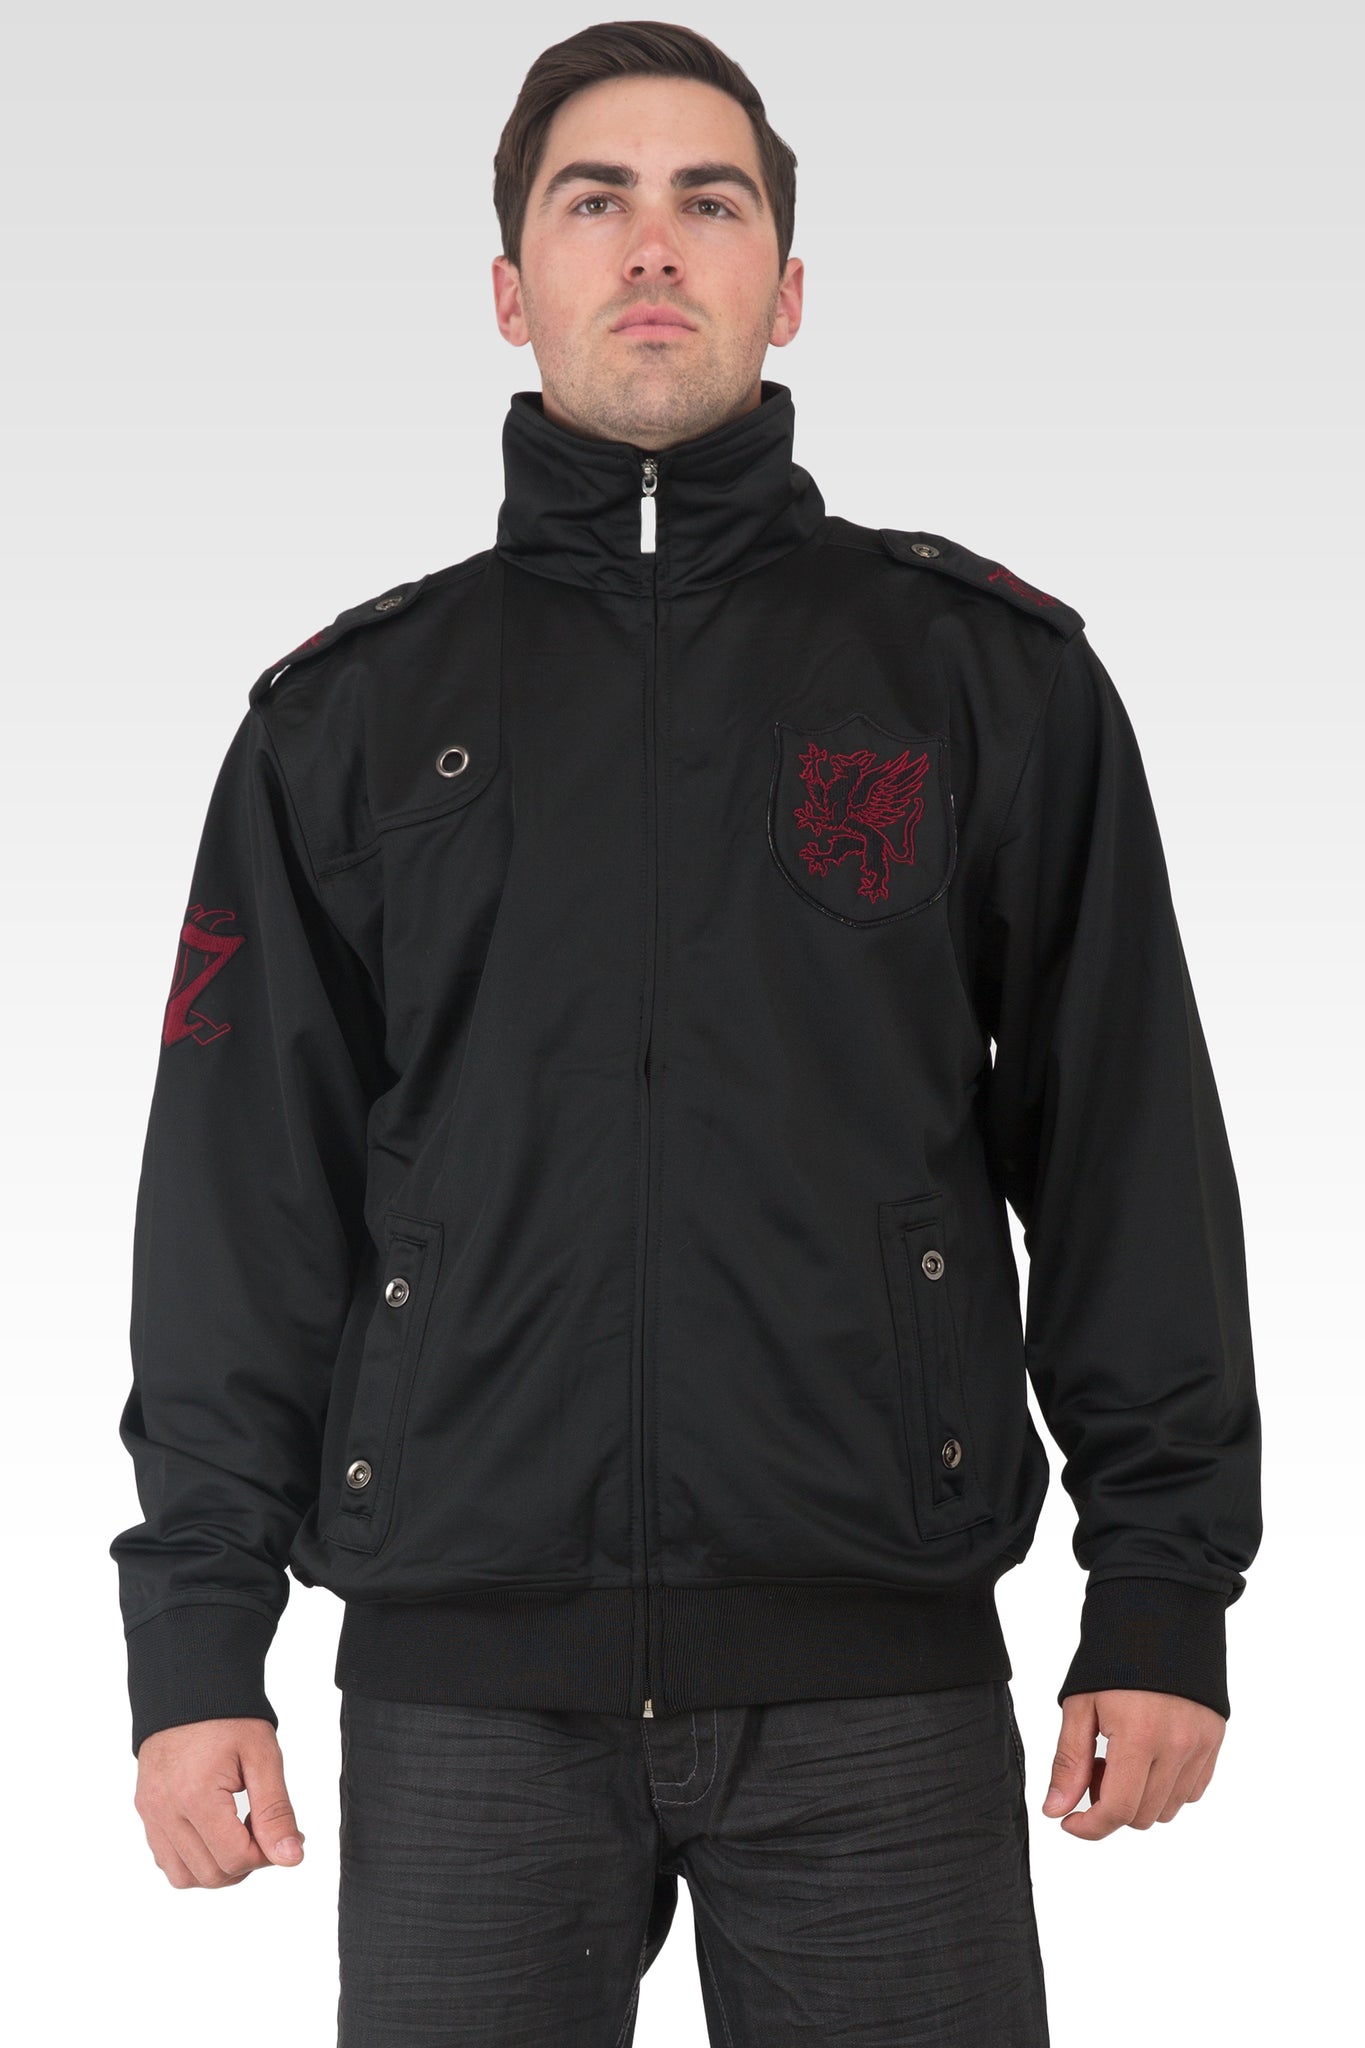 Men's Black Poly Performance Full Zip Track Jacket With Burgundy Embroidery Patches & Epaulets